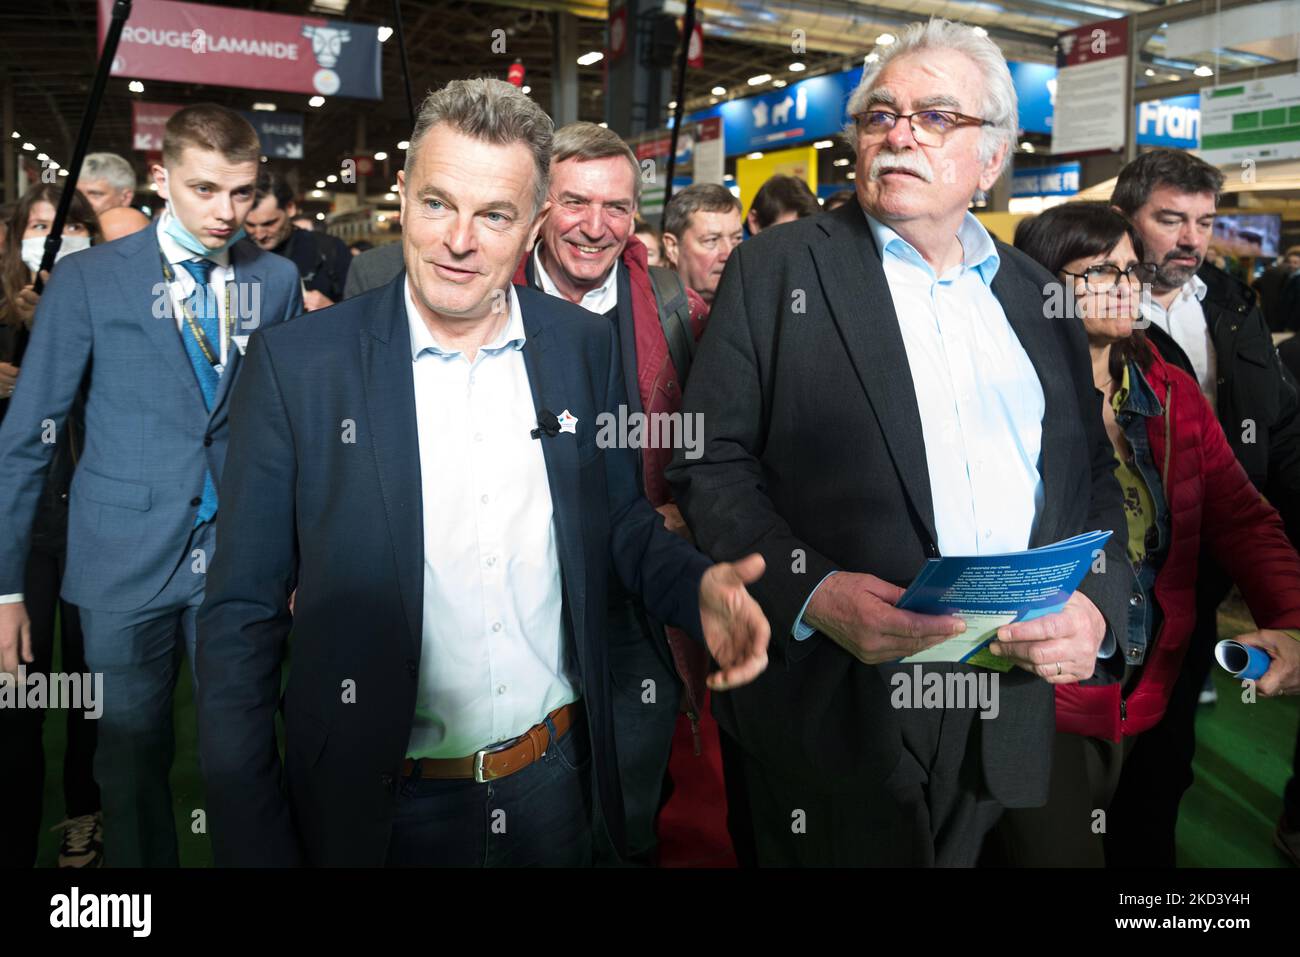 Fabien Roussel, French Communist Party (PCF) presidential candidate, walks in the aisles during the traditional visit of the presidential candidates to the International Agricultural Show currently held at the Parc des Exposition de la Porte de Versailles in Paris on February 28, 2022. (Photo by Samuel Boivin/NurPhoto) Stock Photo